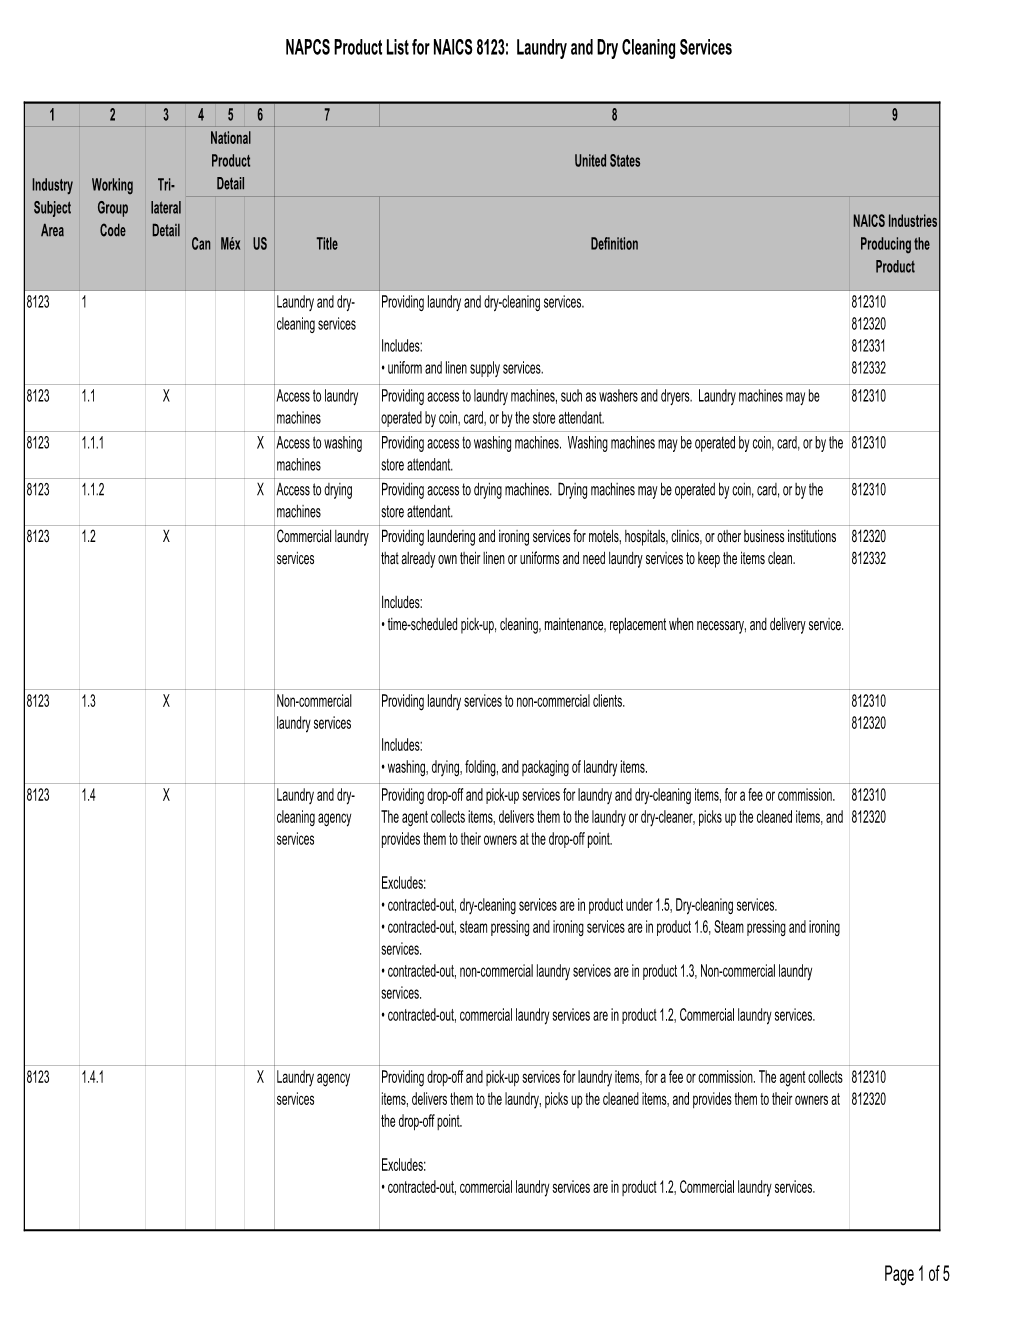 NAPCS Product List for NAICS 8123: Laundry and Dry Cleaning Services Page 1 of 5